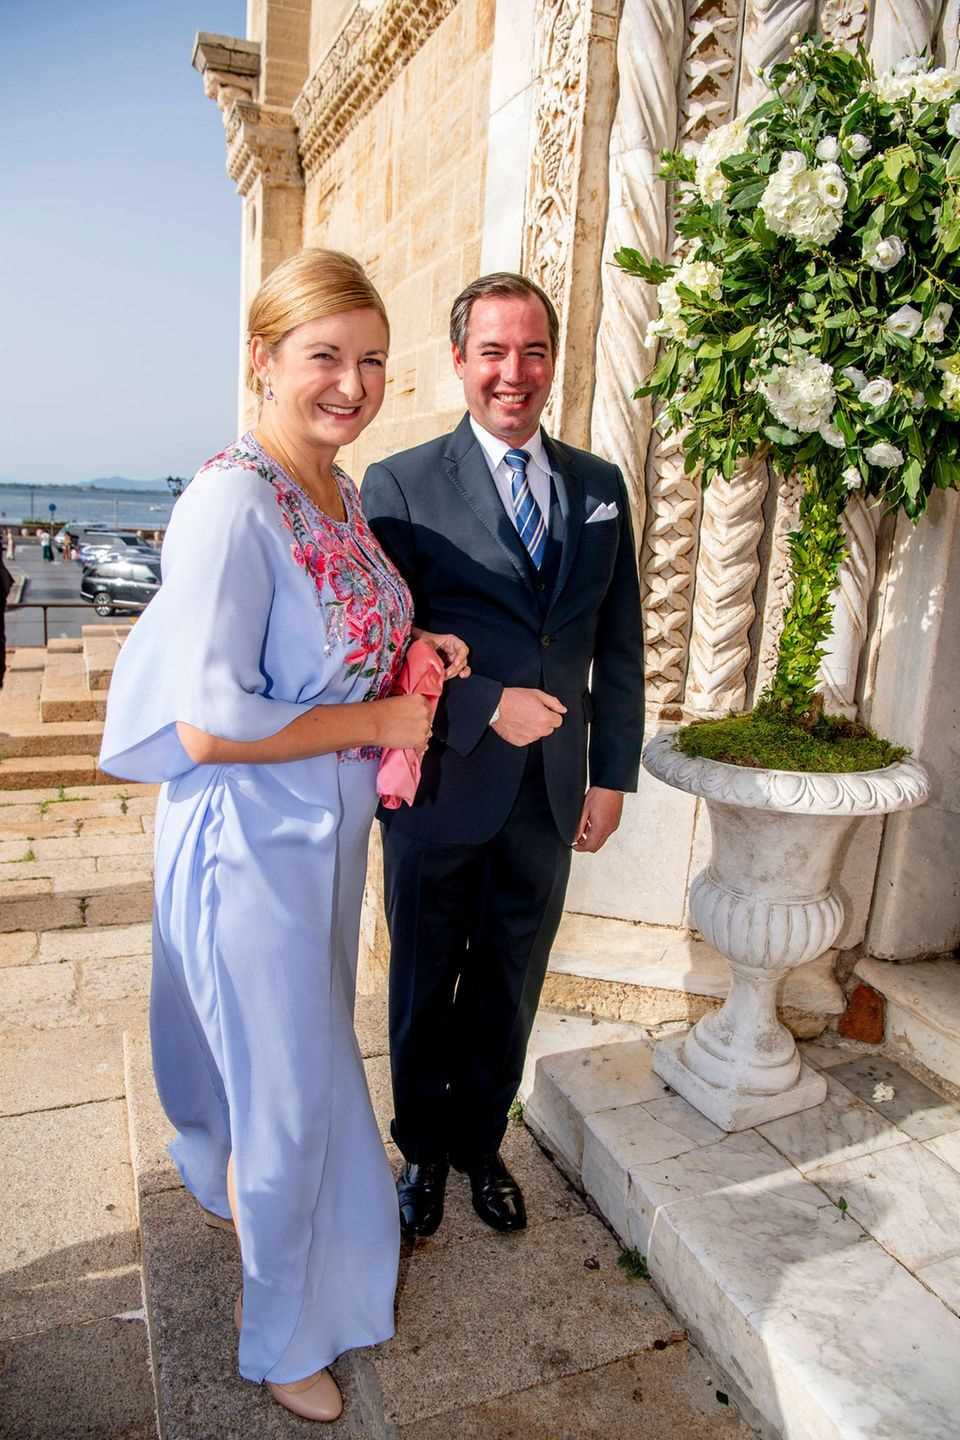 Hereditary Grand Duke Guillaume and Hereditary Grand Duchess Stéphanie were also there in Italy